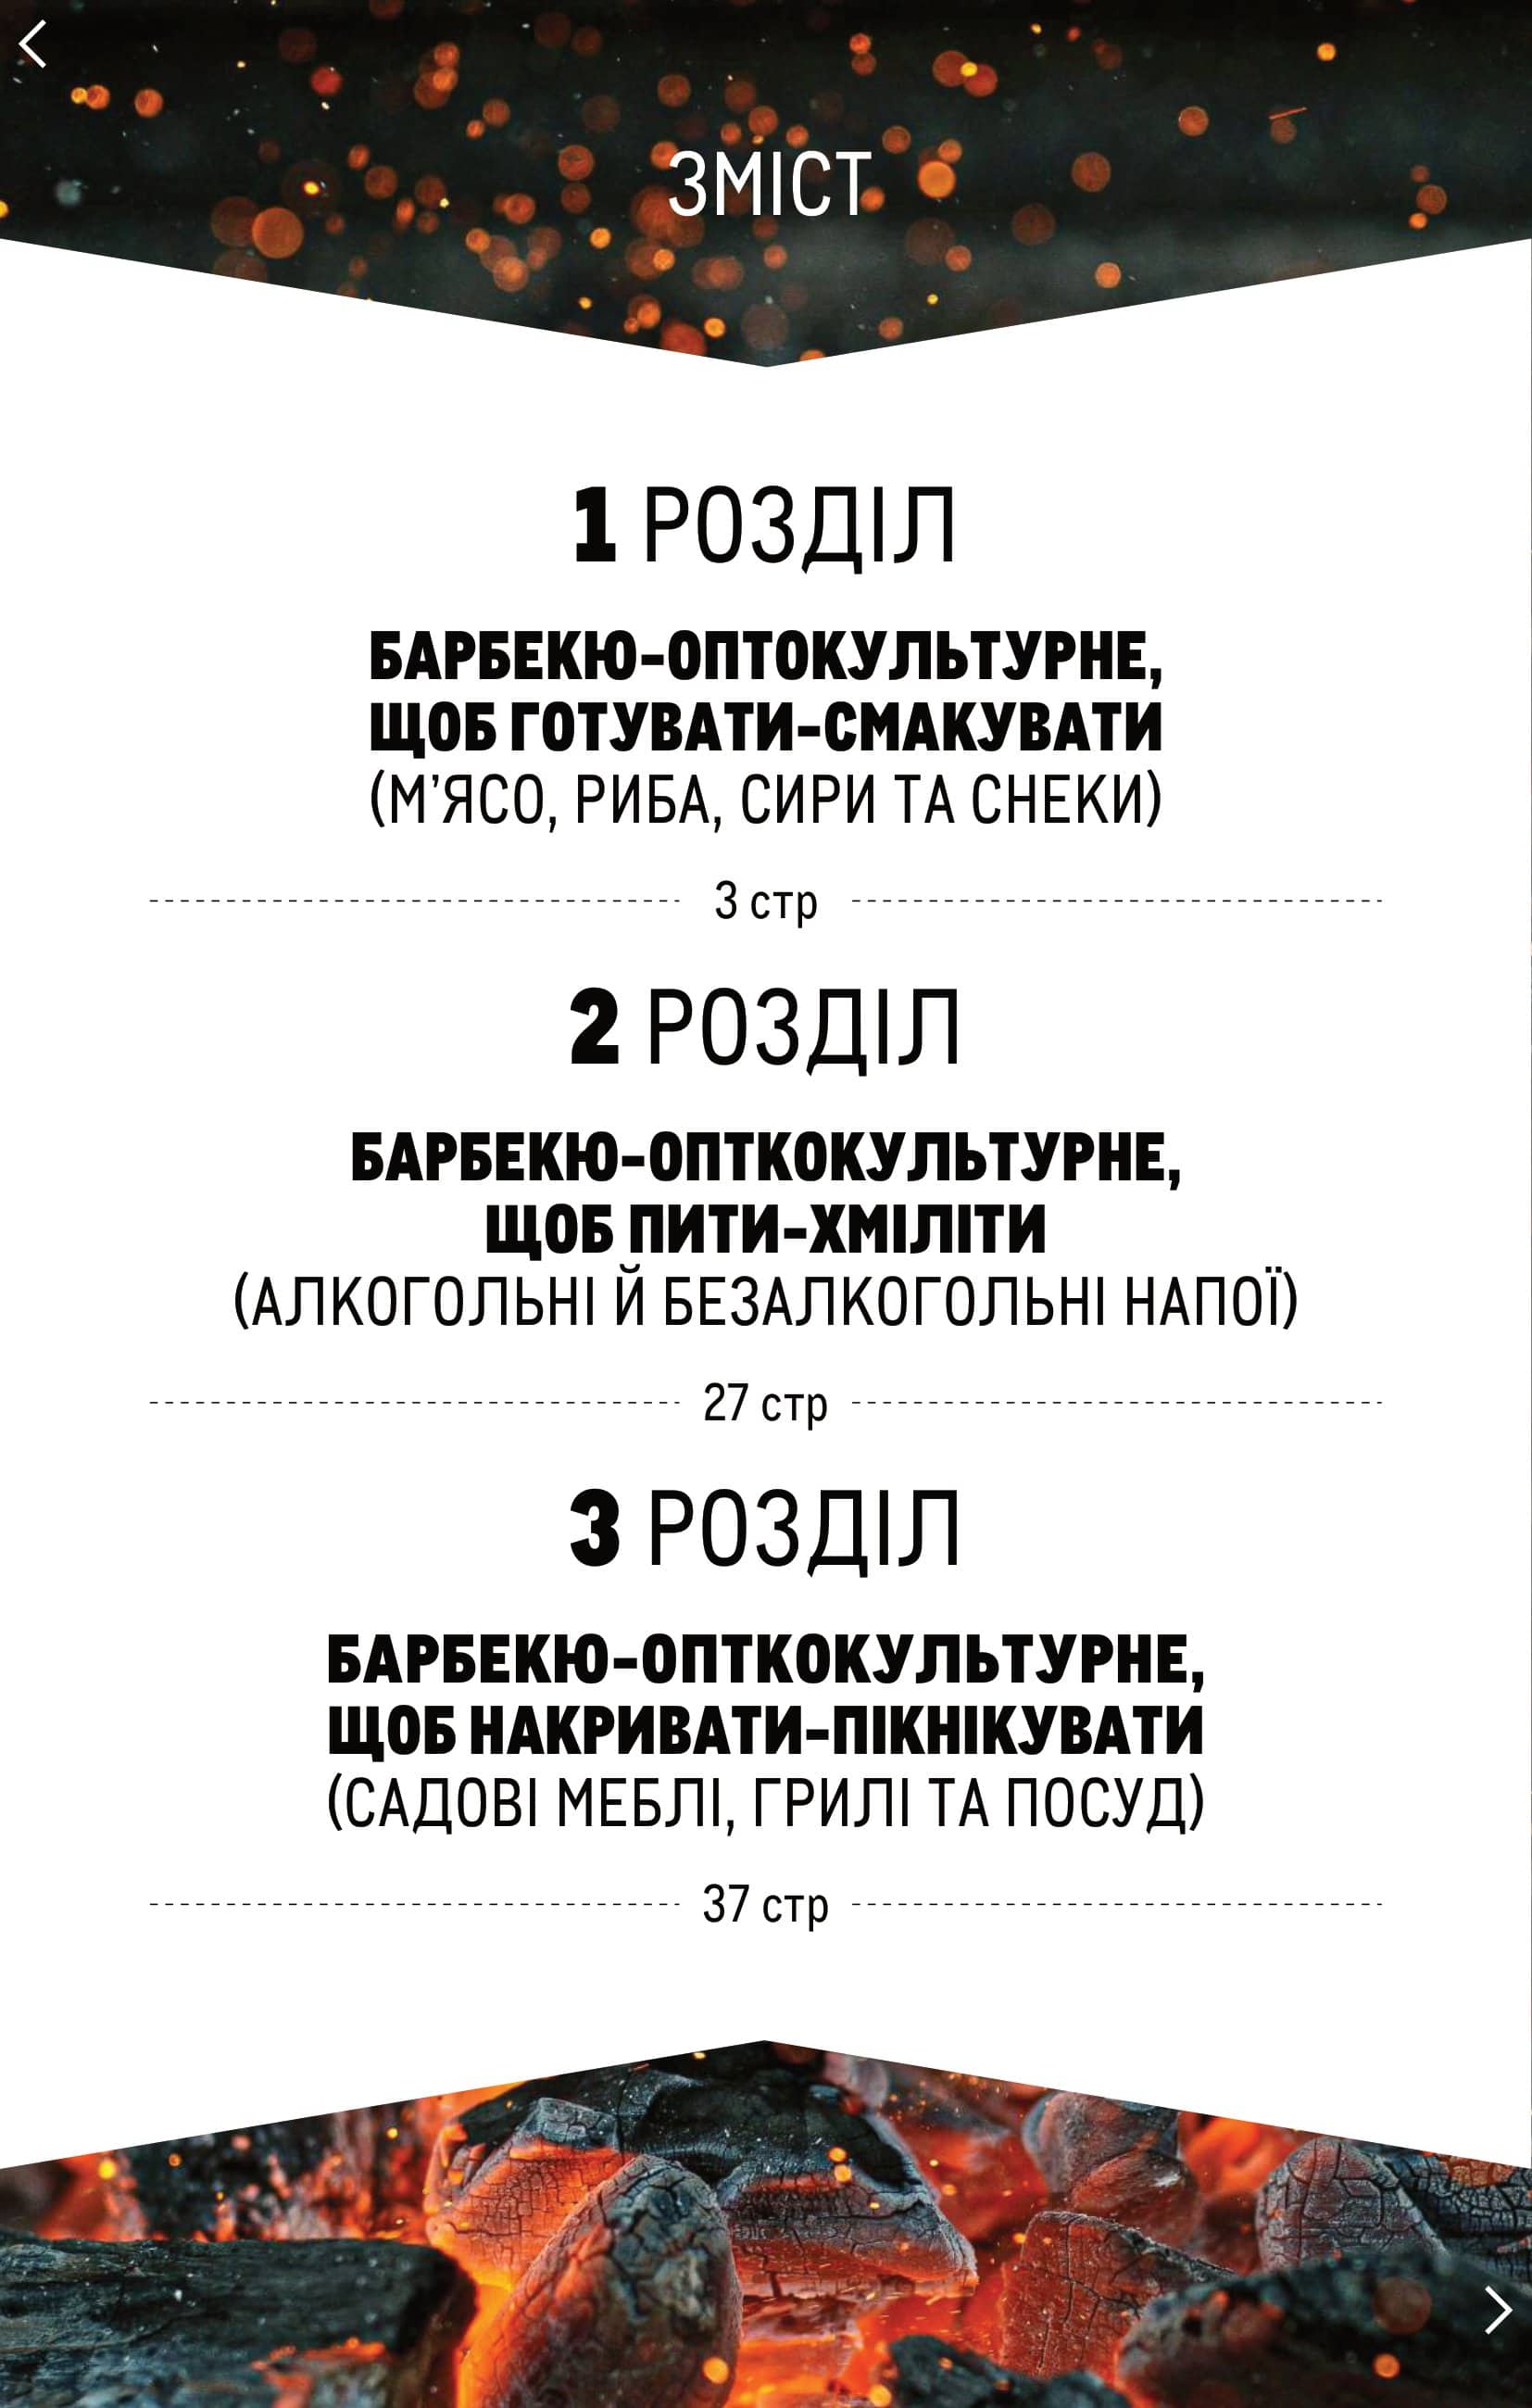 Metro - Catalog of optocultural barbecue - 2